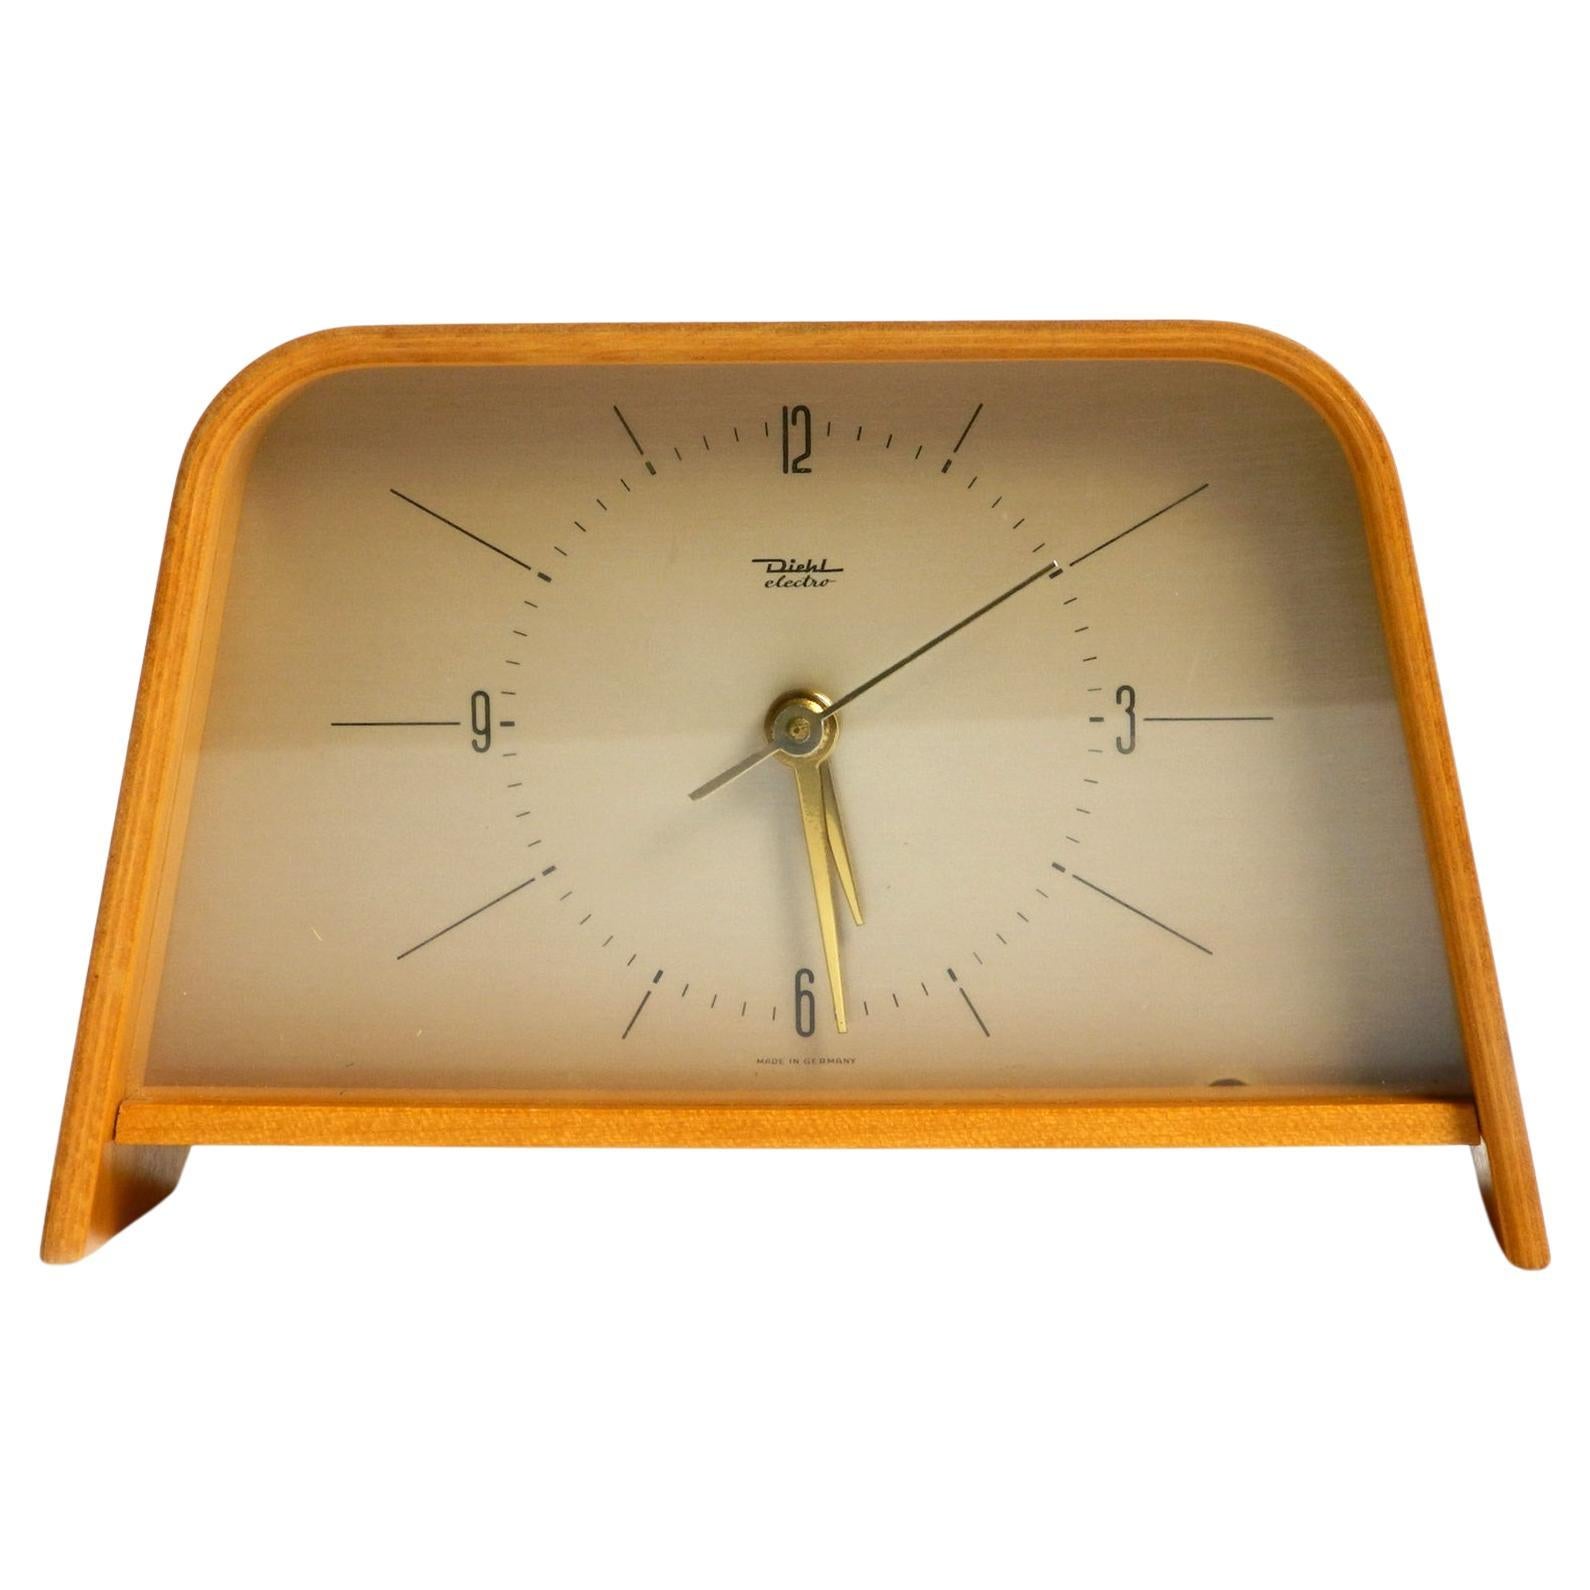 Beautiful original 1950s Diehl Electro table clock with curved teak plywood